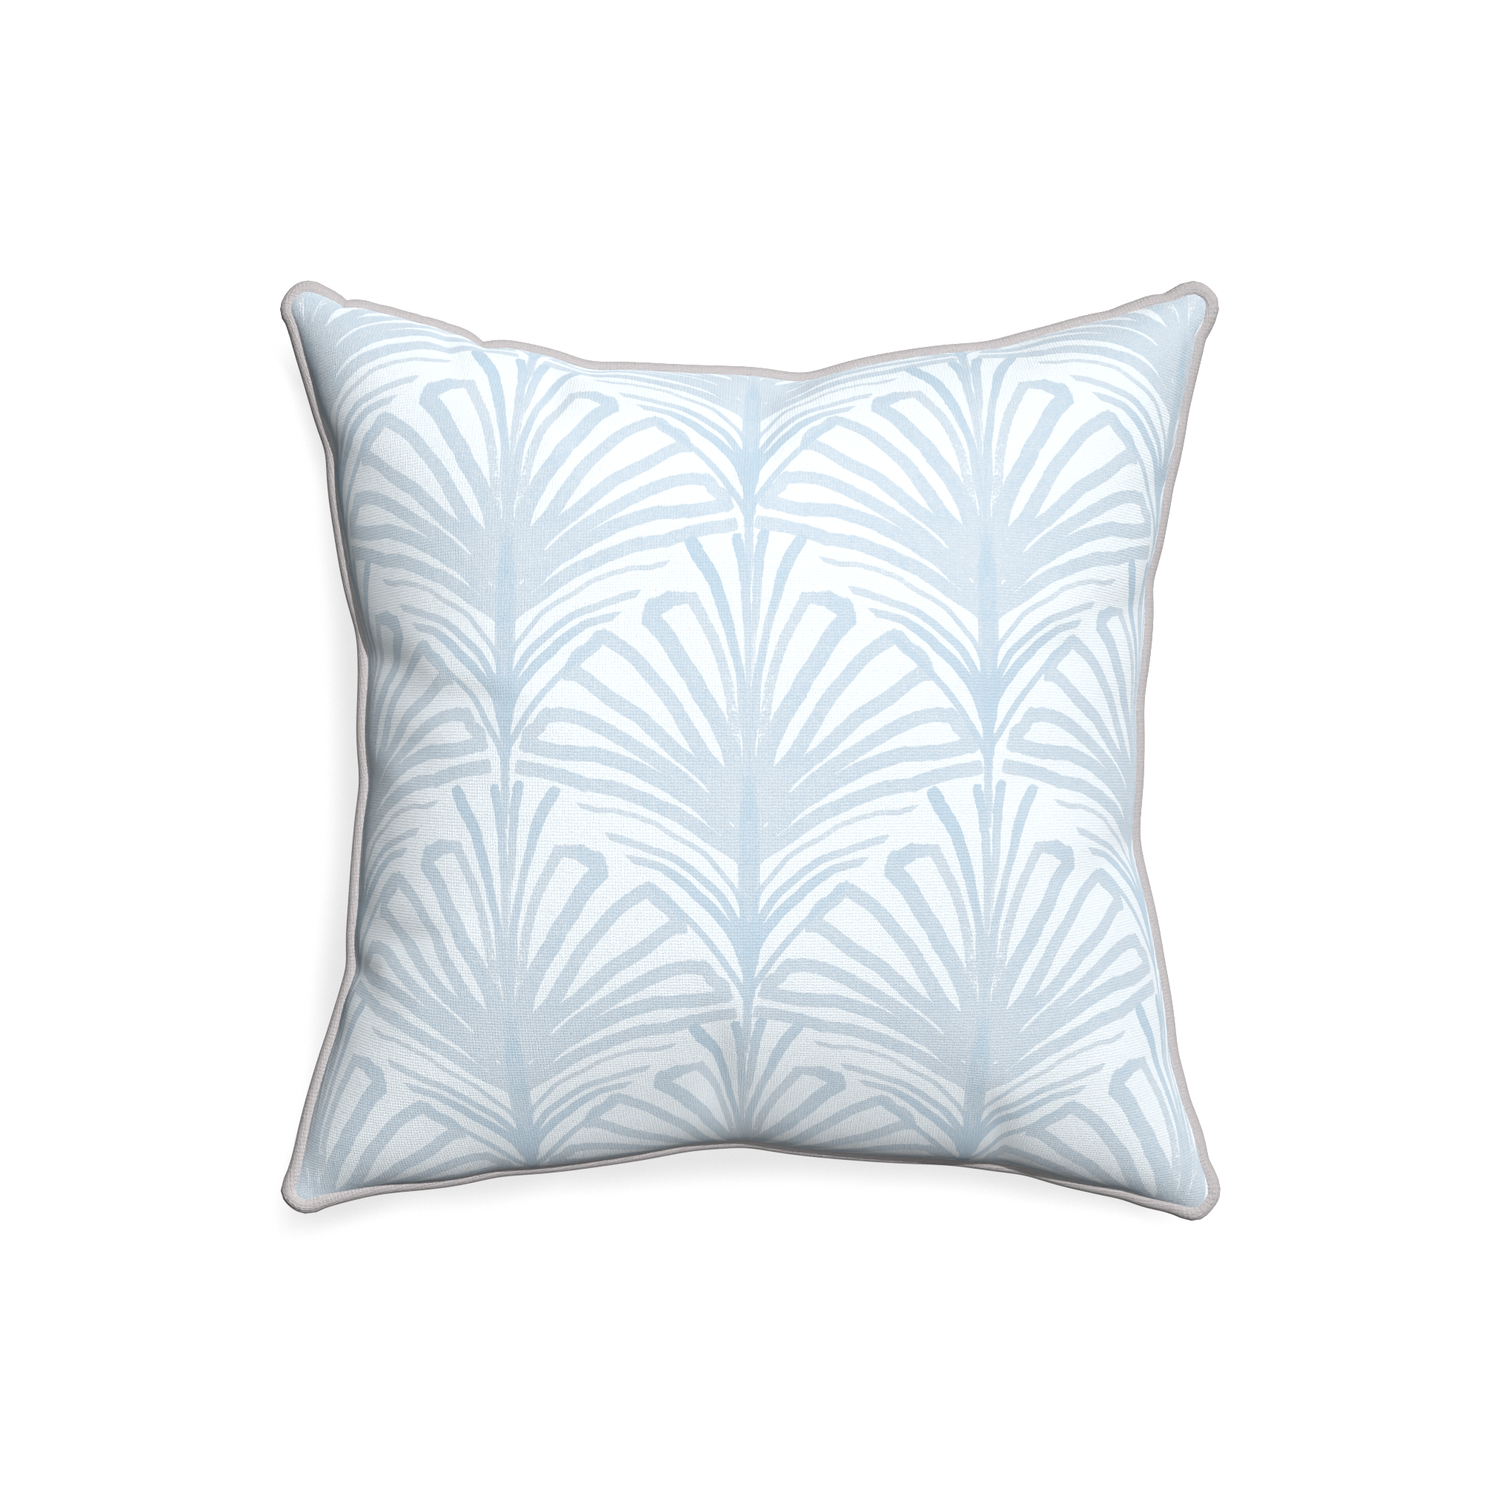 20-square suzy sky custom pillow with pebble piping on white background